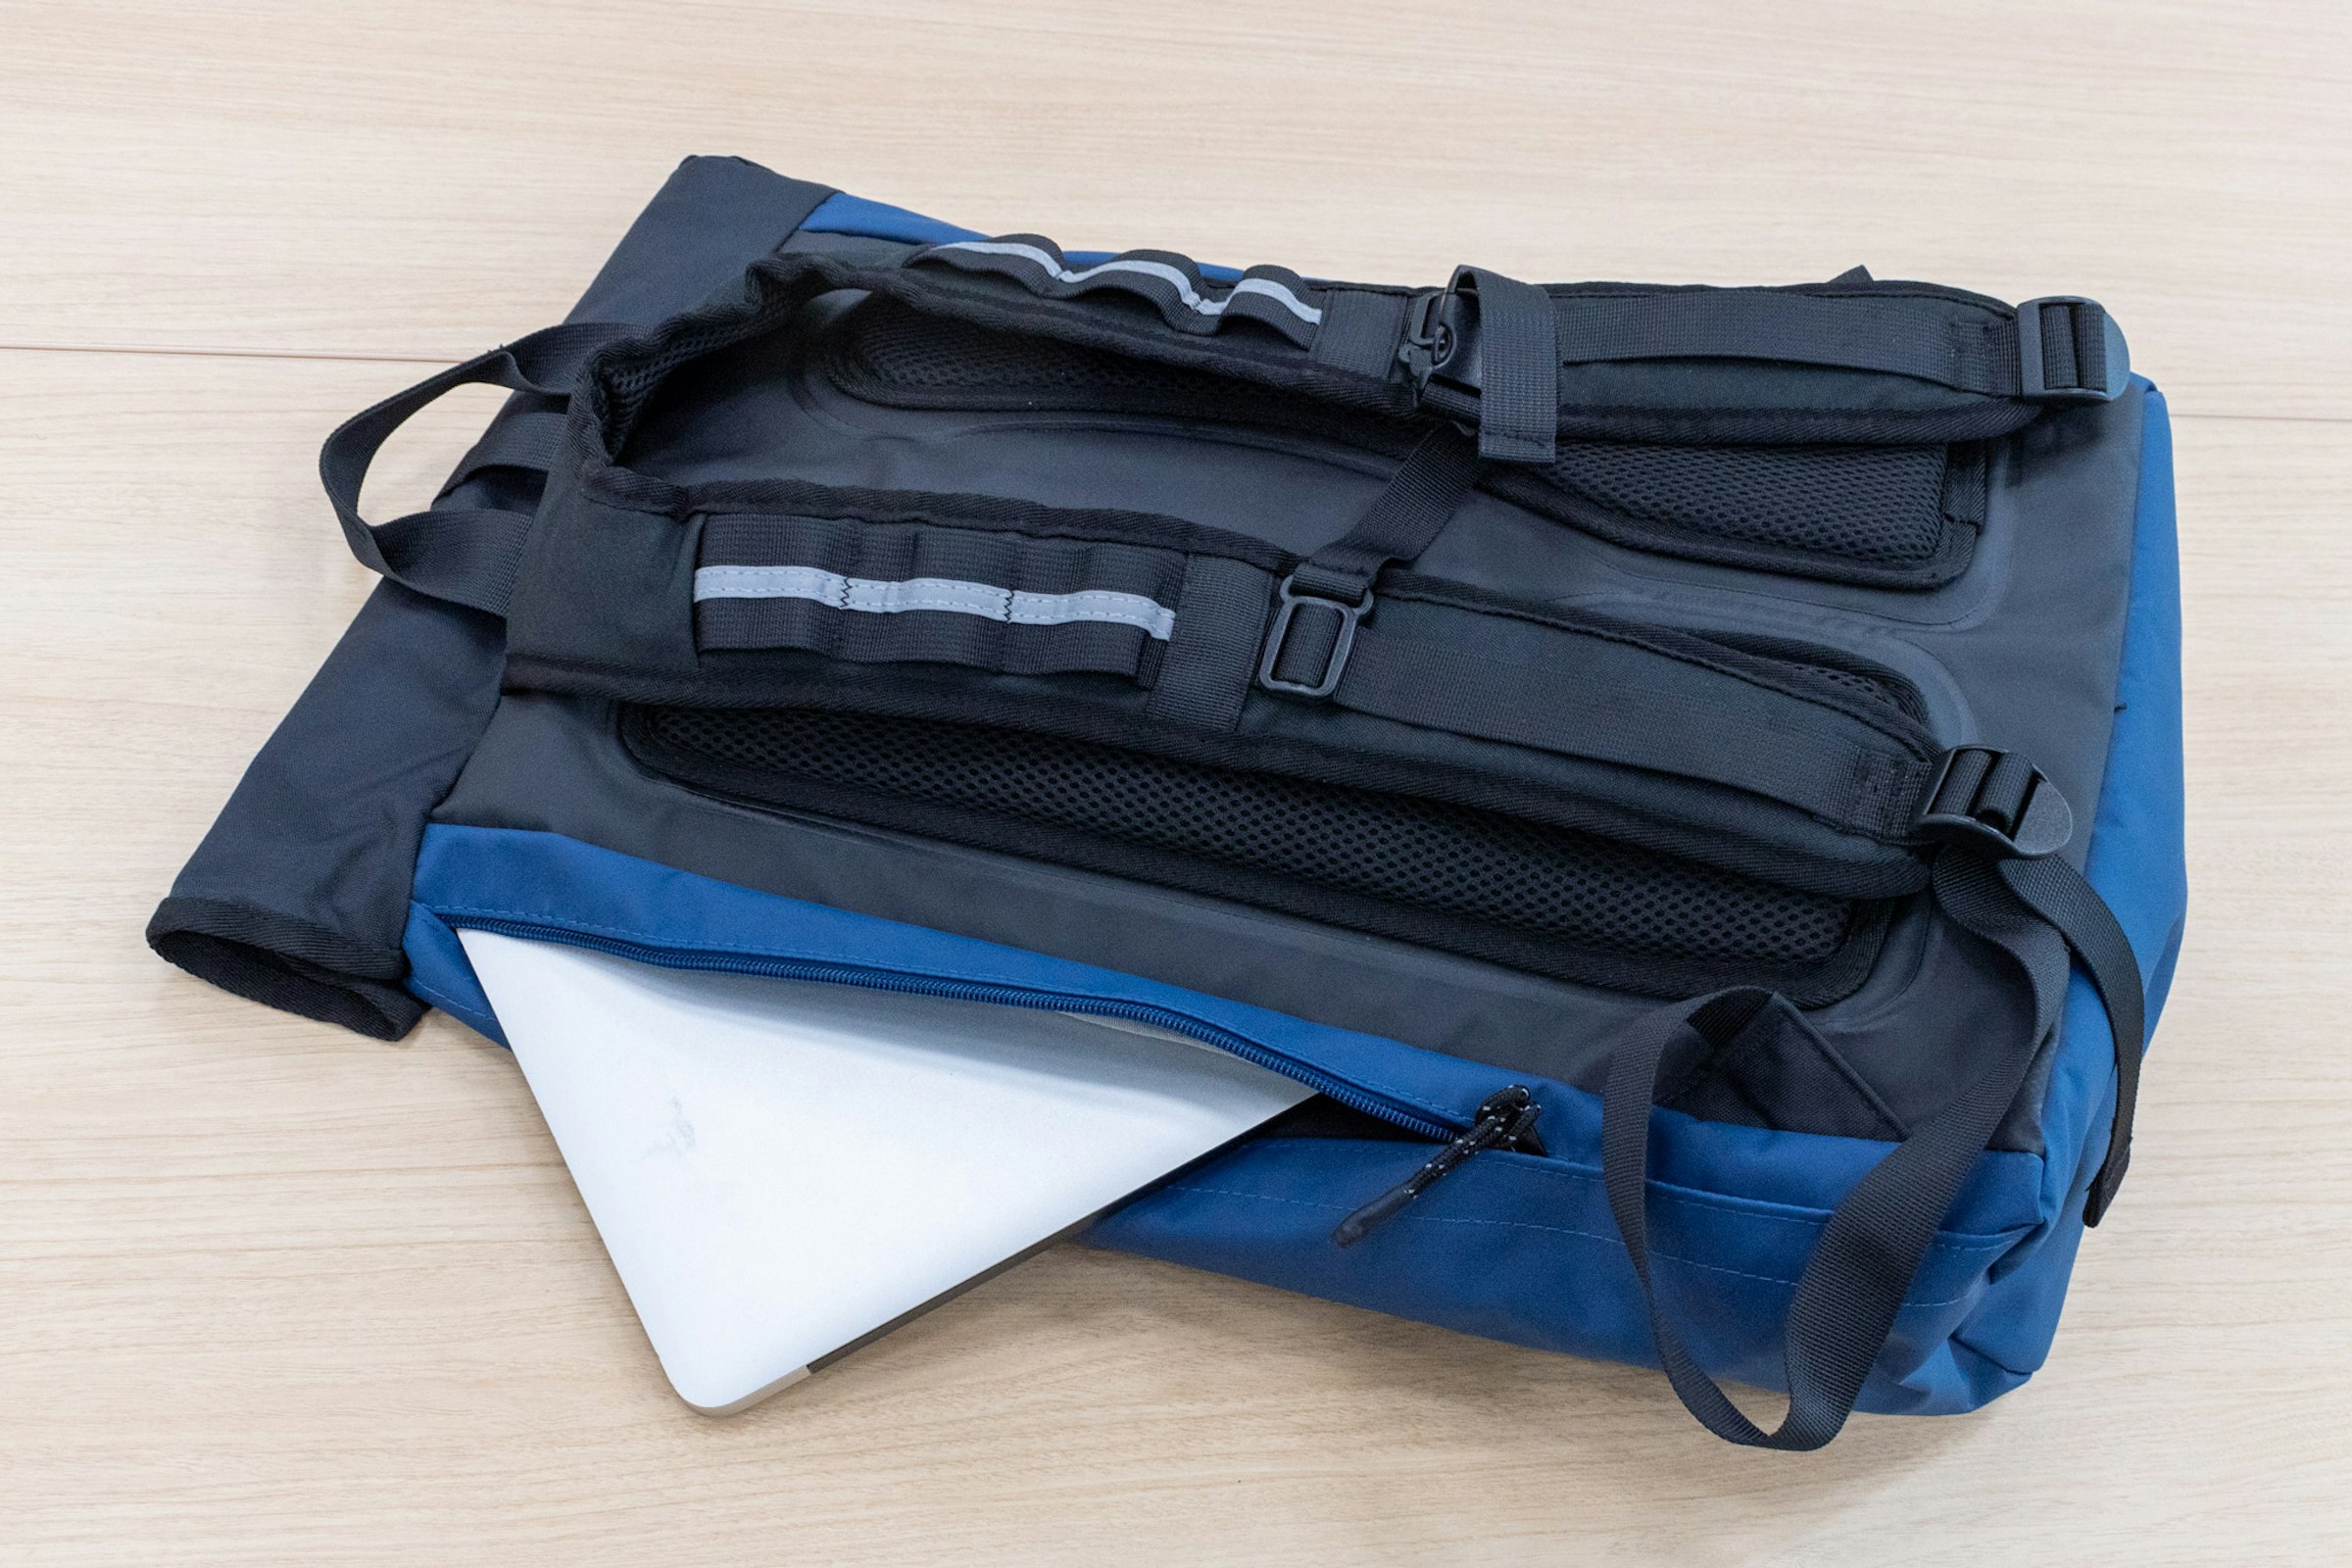 It's possible for business use too, thanks to a zipper pocket on the side that can hold A4-sized documents.